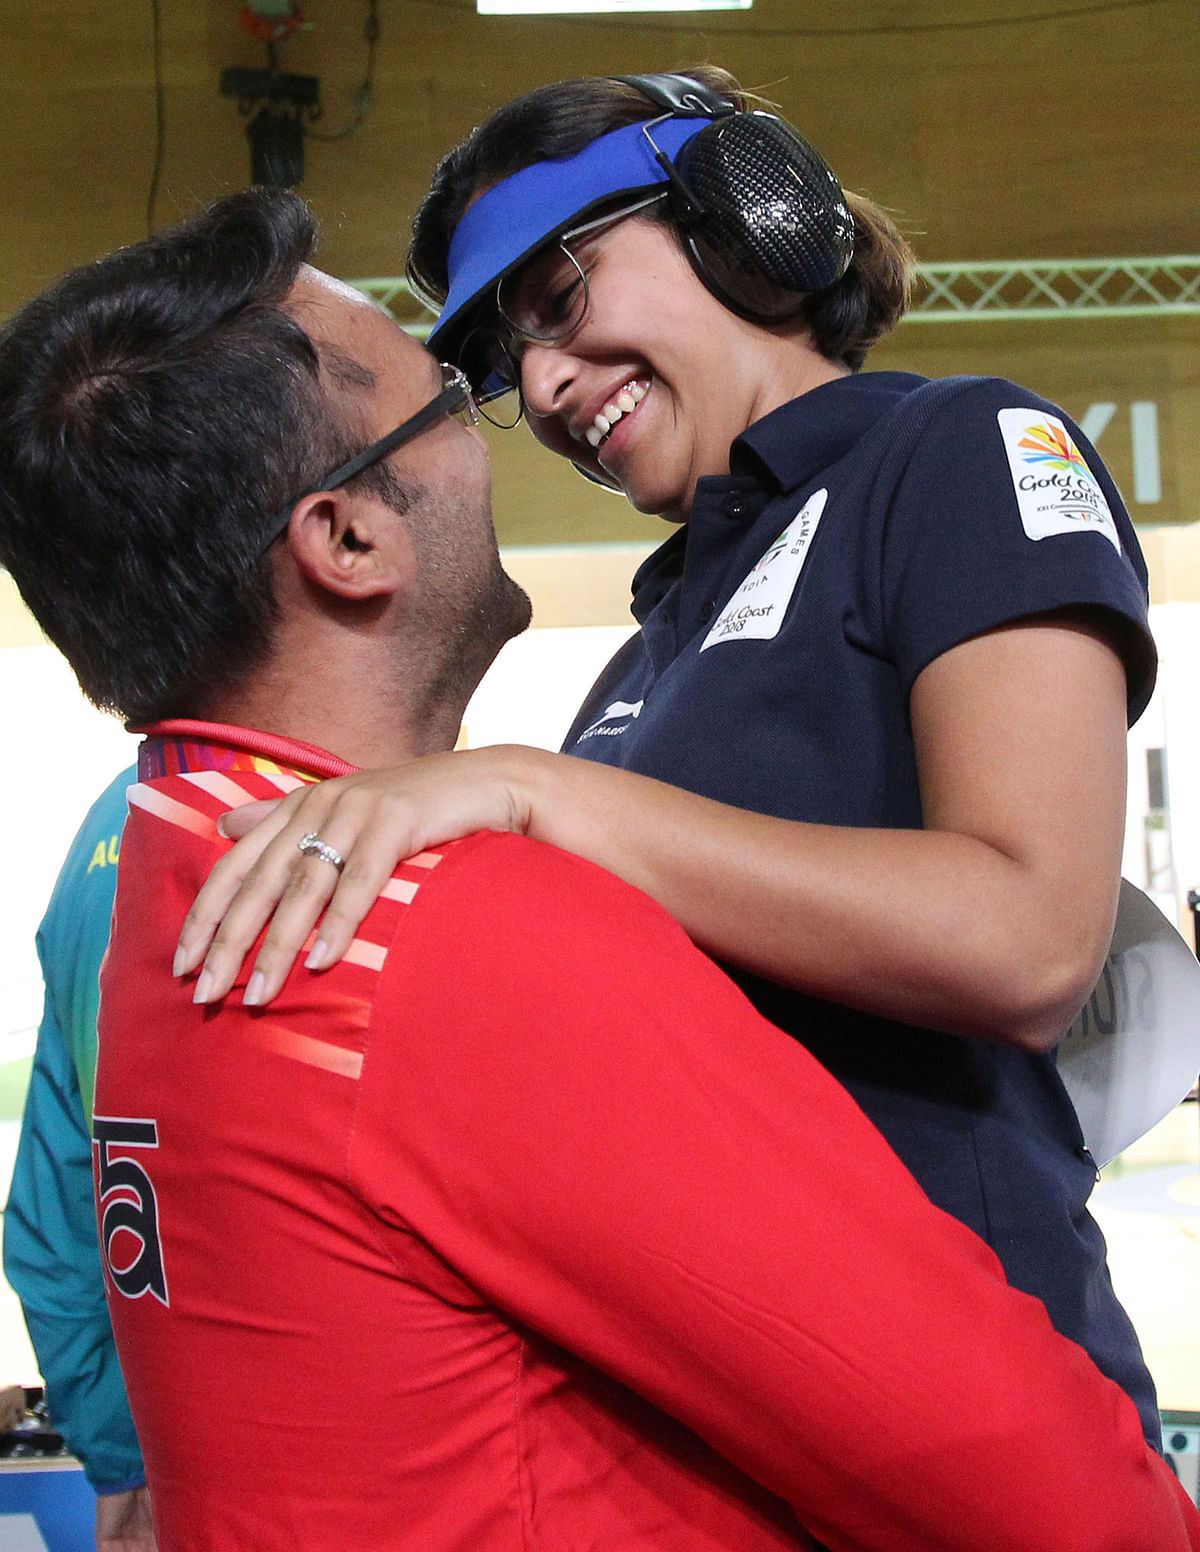 CWG 2018: Heena Sidhu wins the gold medal in the 25m pistol final in Gold Coast.